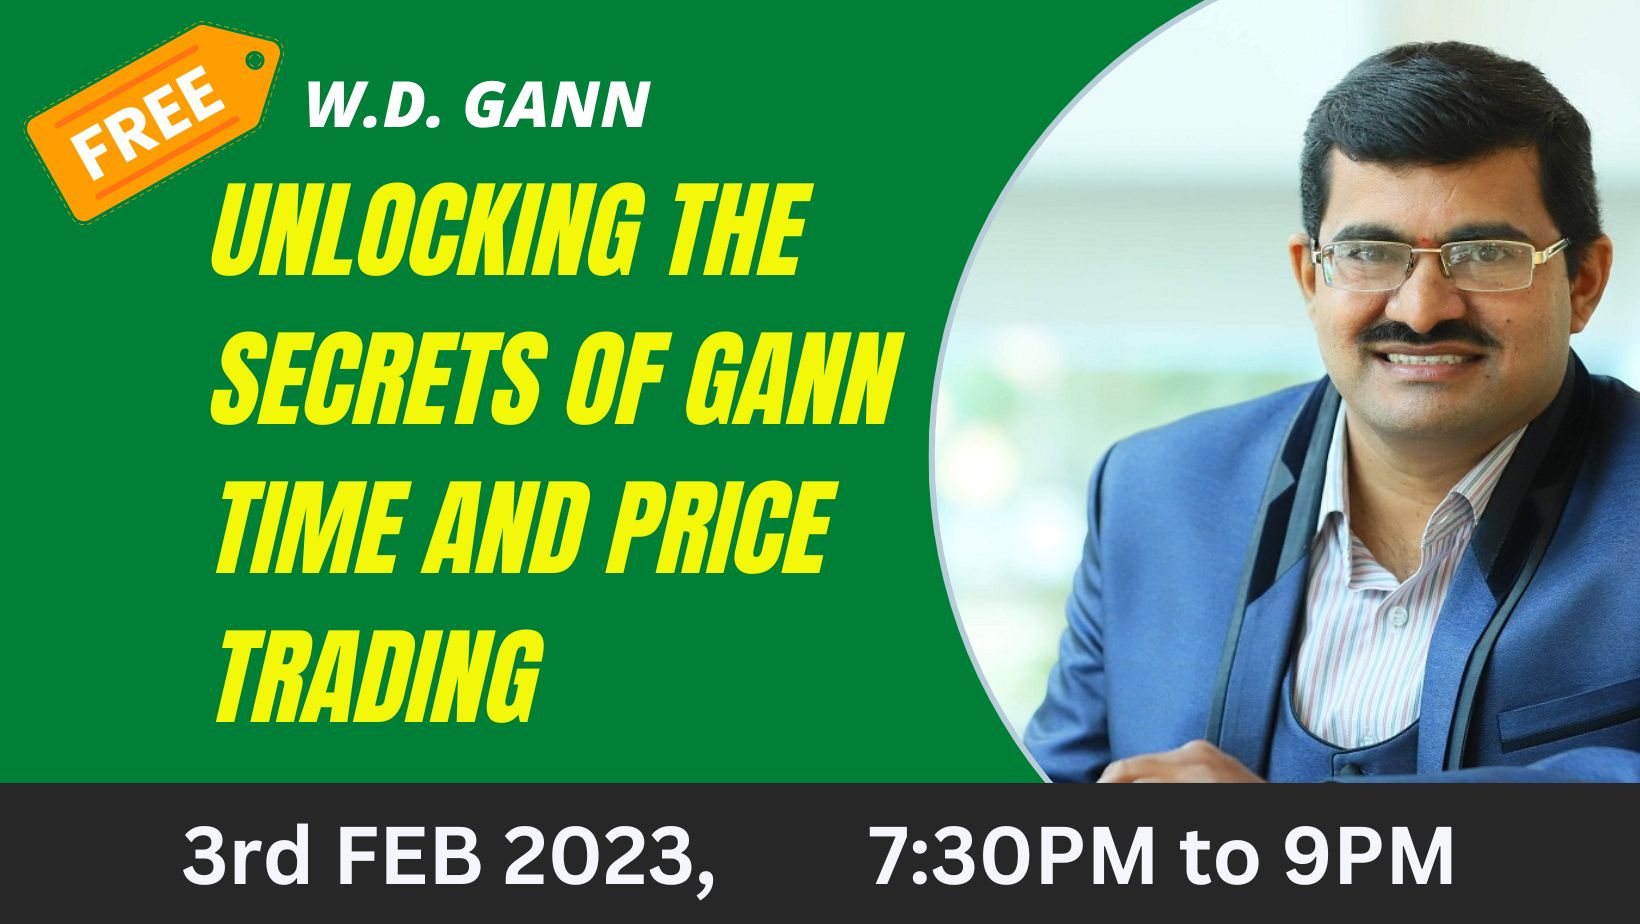 Unlocking the Secrets of Gann Time and Price Trading: A Webinar", Online Event